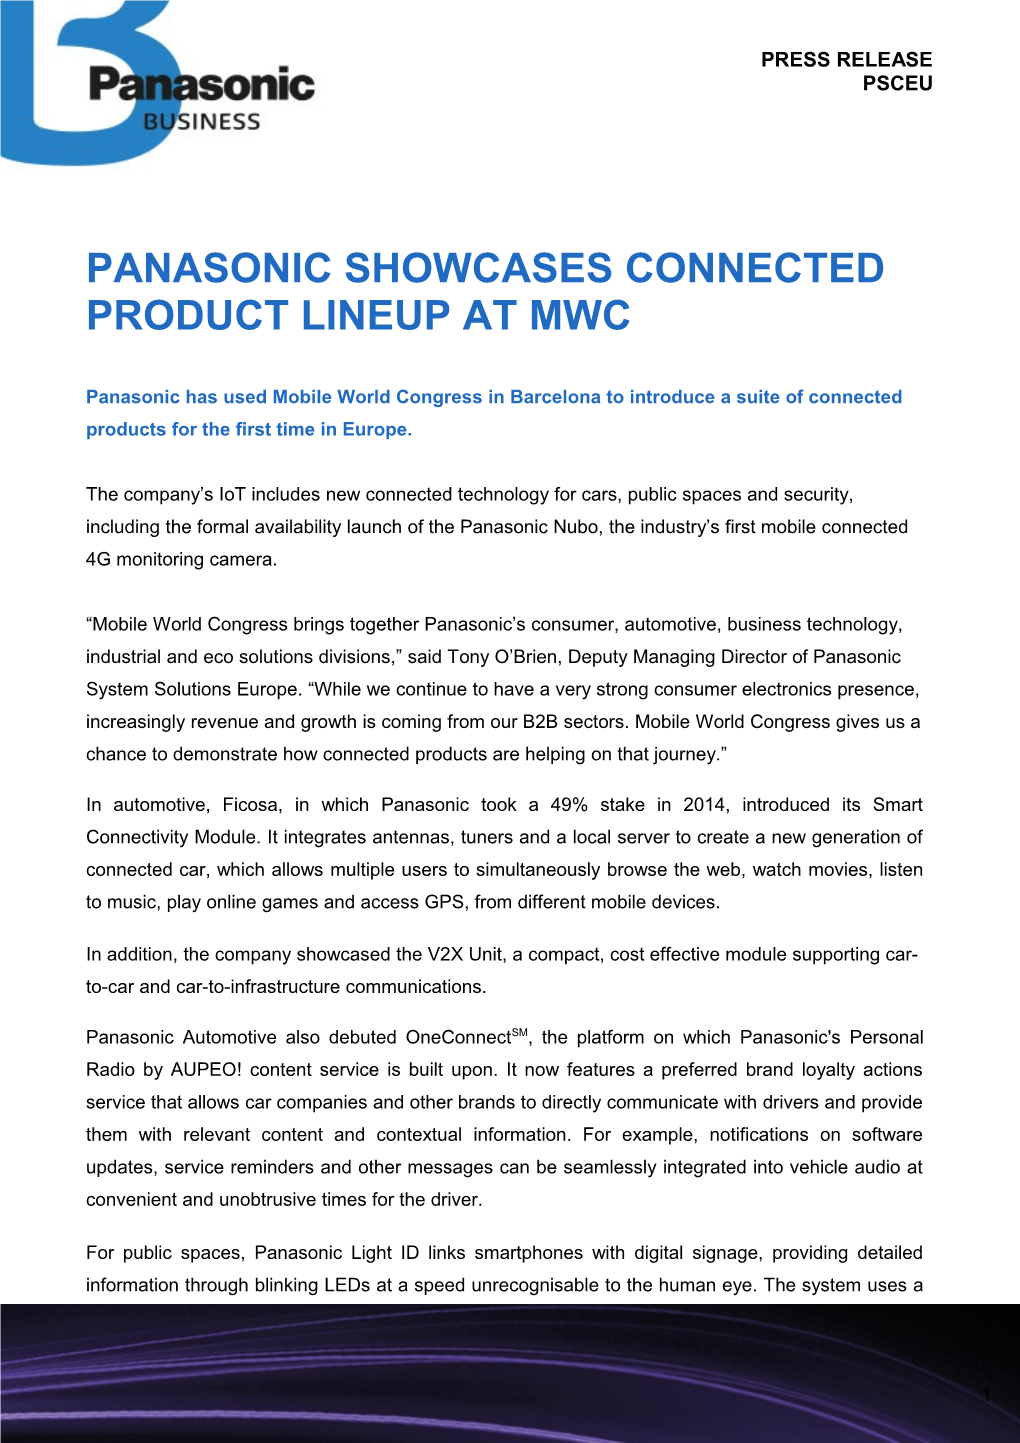 Panasonic Showcases Connected Product Lineup at Mwc